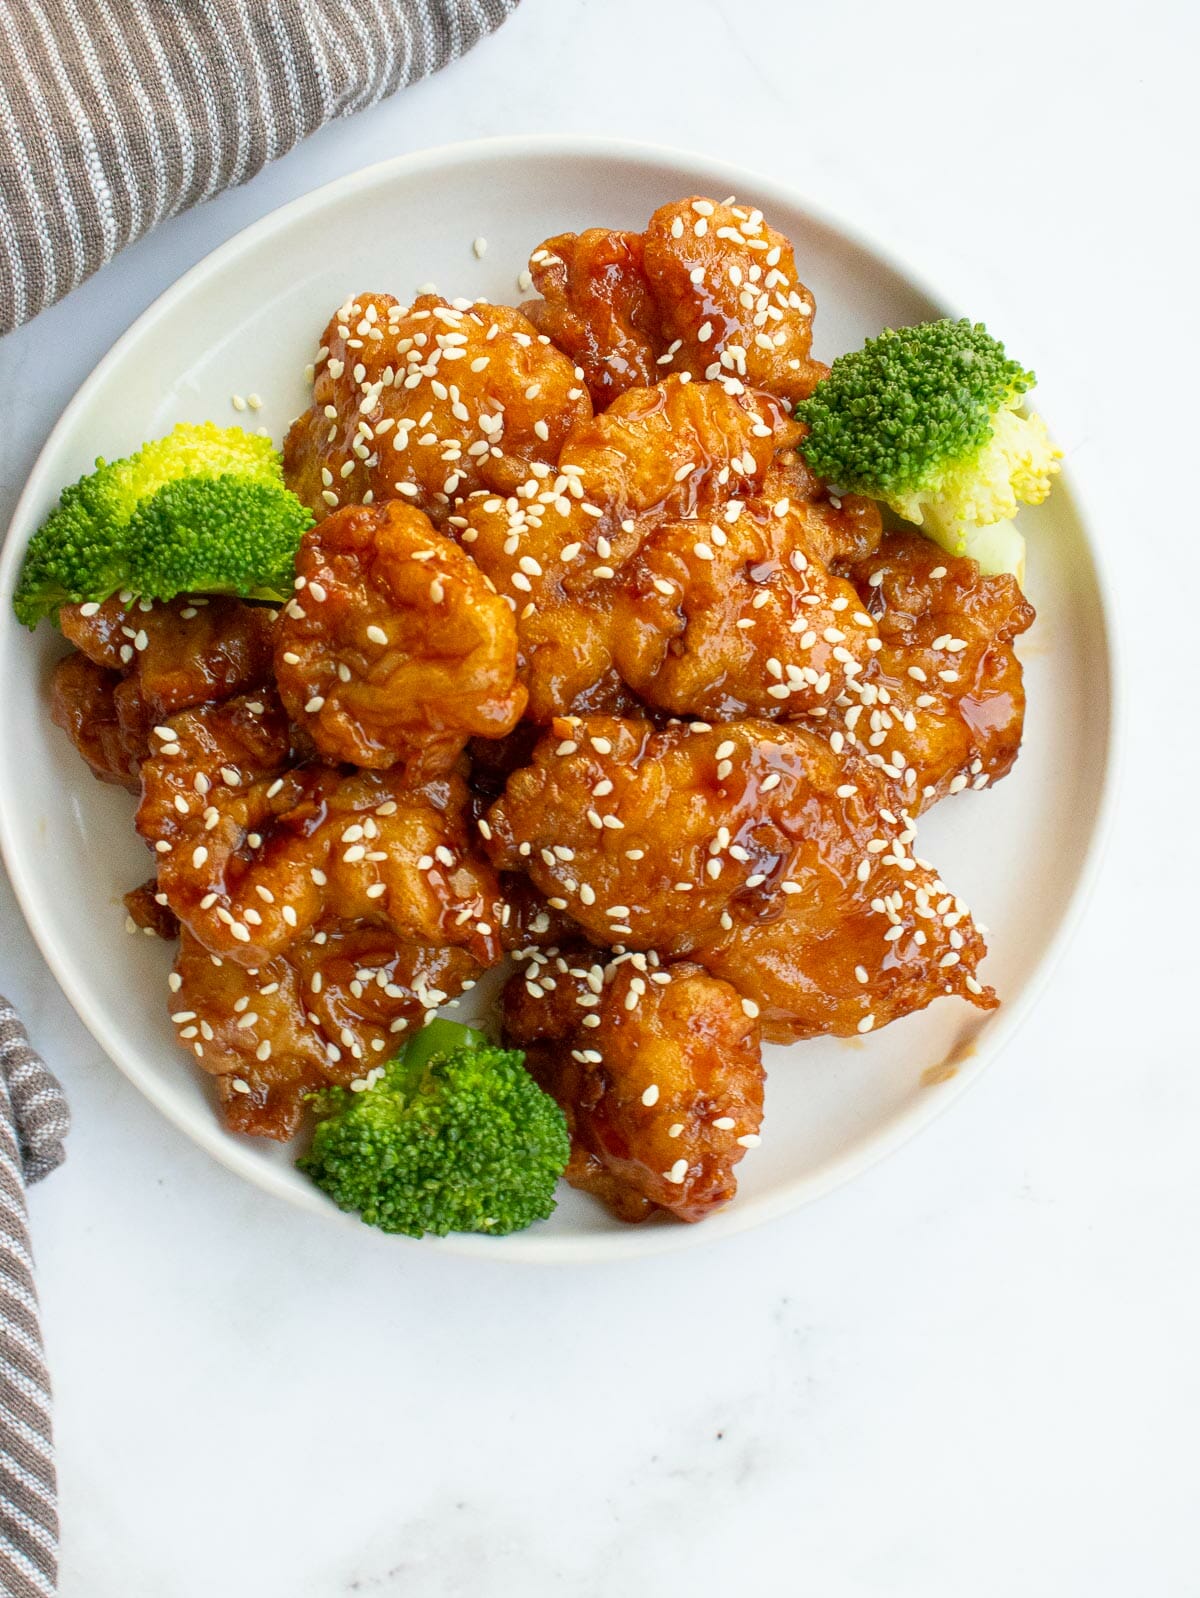 sesame chicken and steamed broccoli put on a white plate next to a brown stripe towel